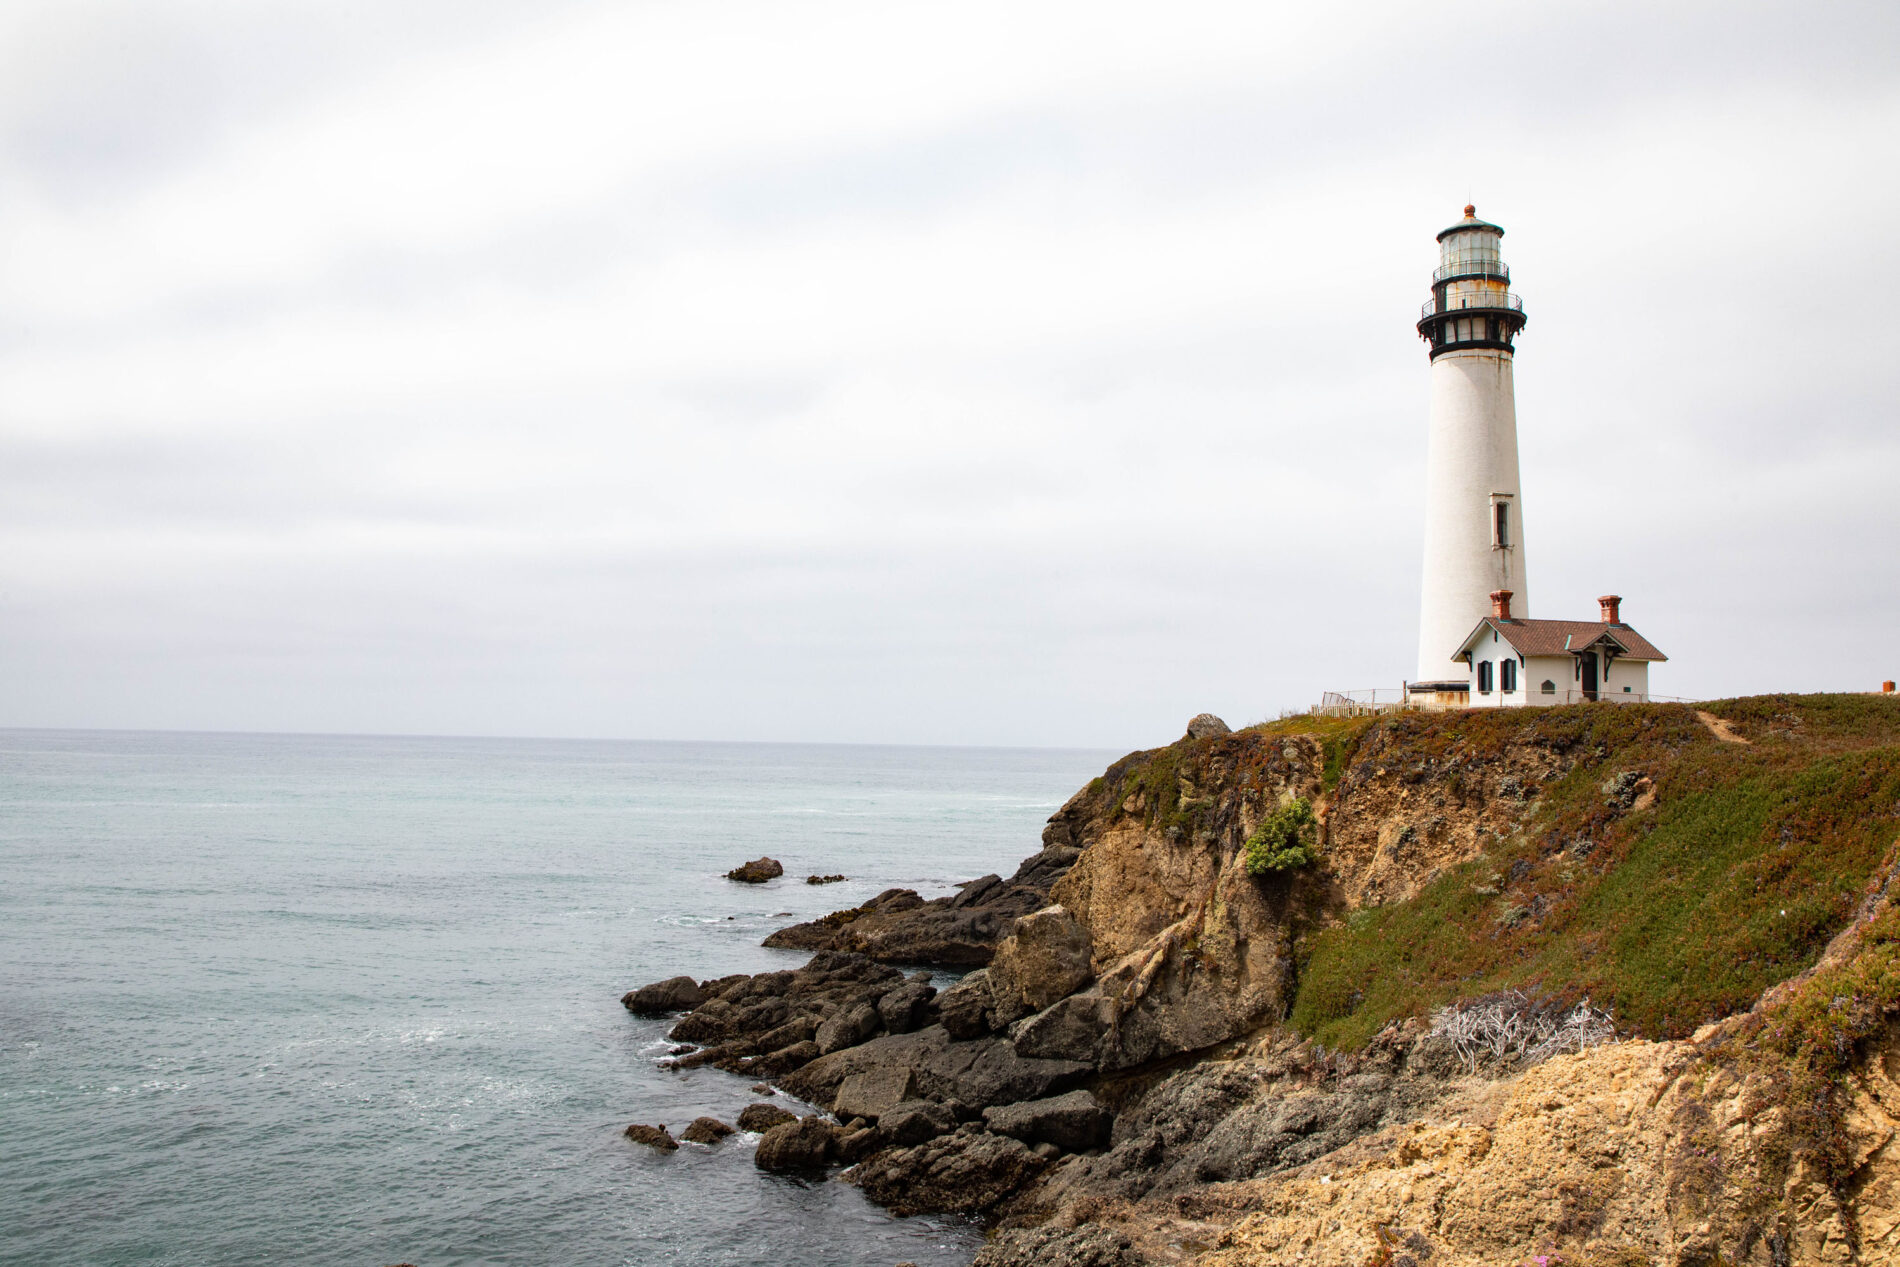 Along Pacific Highway 1, you will have great views, like this one of Pigeon Point Lighthouse.